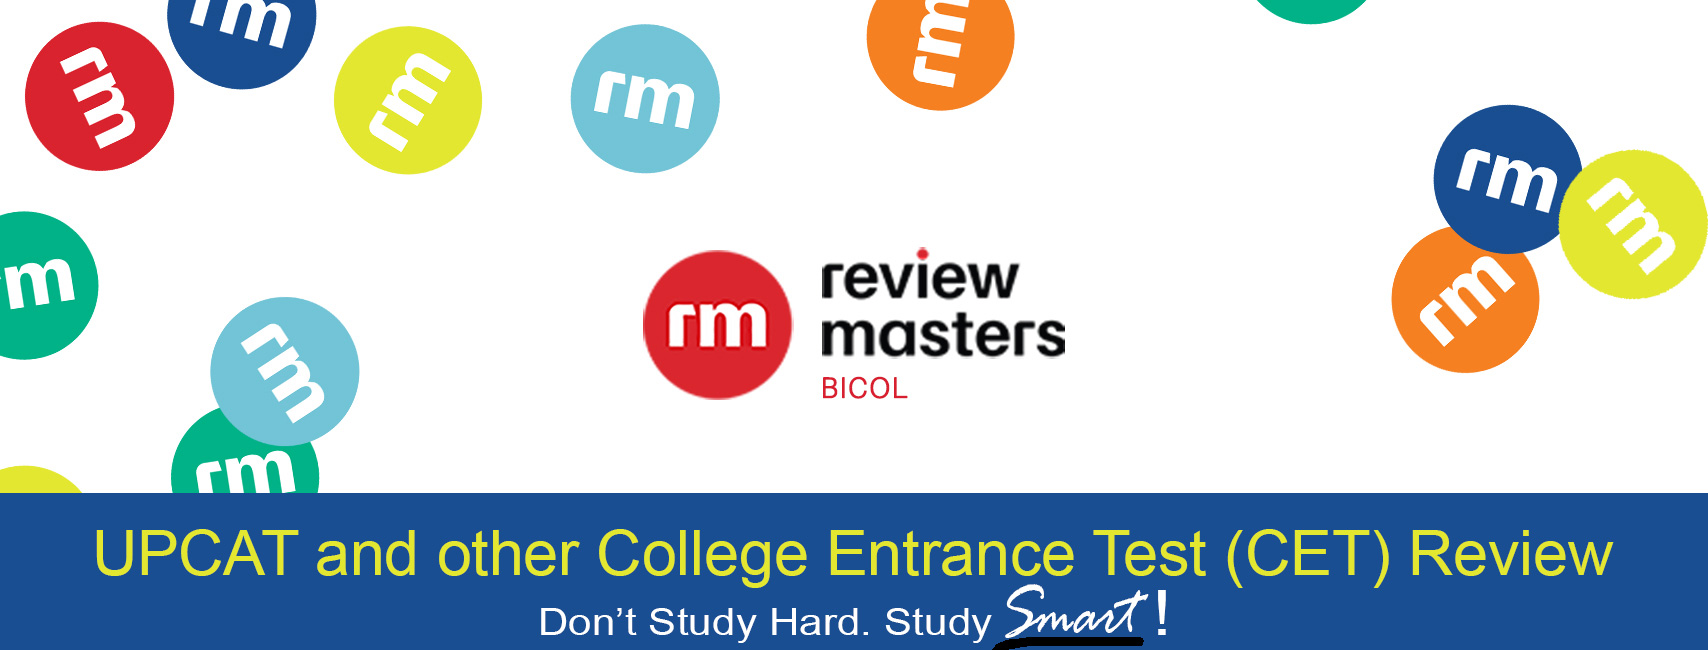 Review Masters Bicol UPCAT review and other college entrance test review